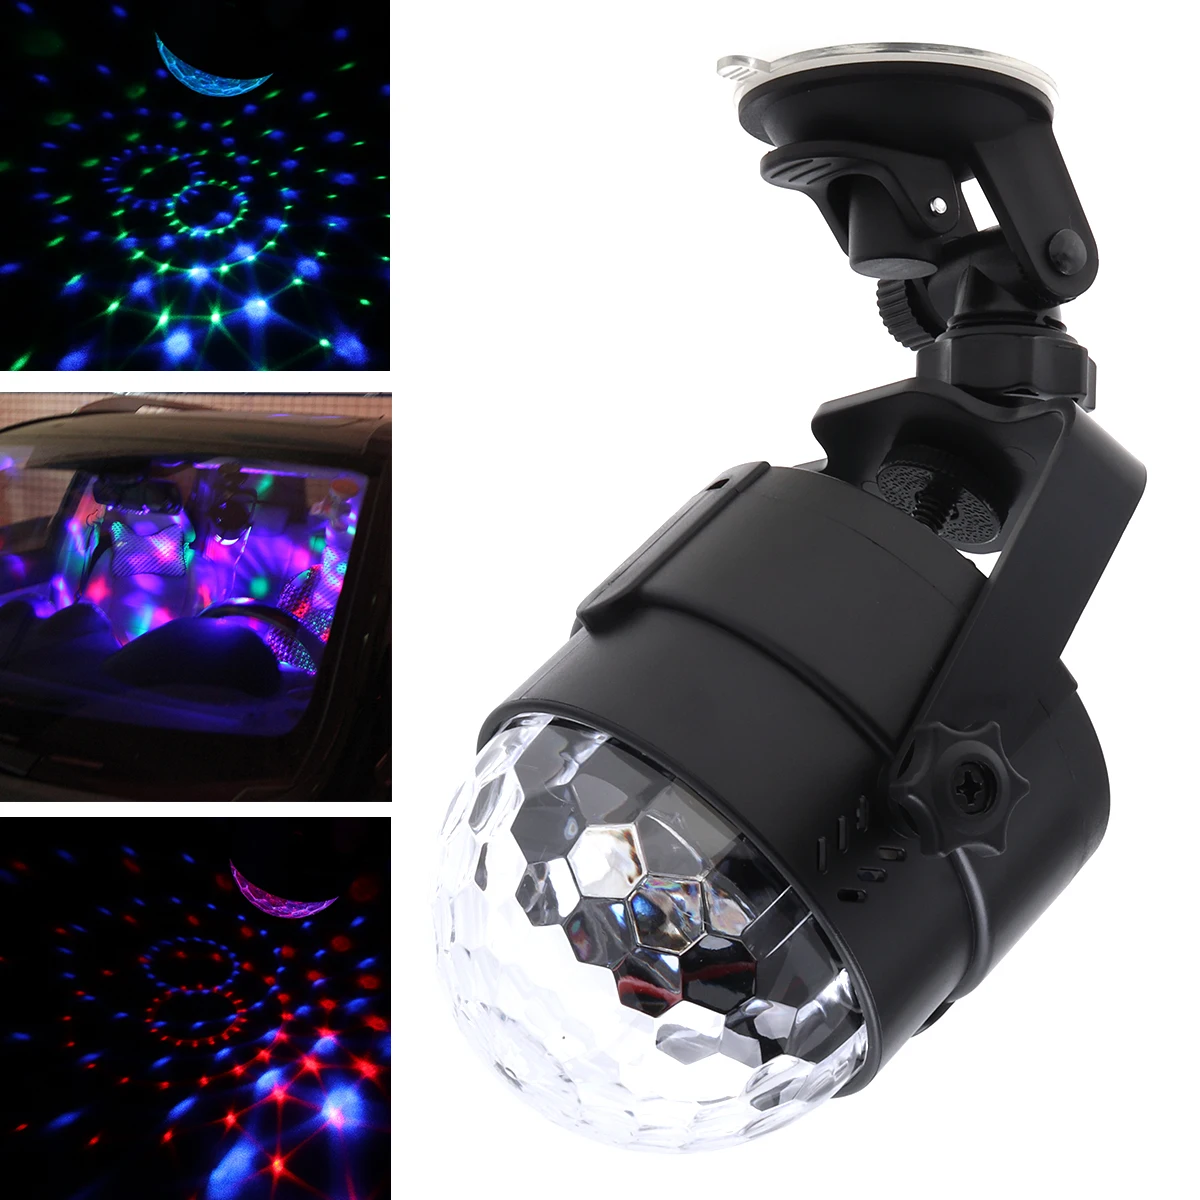 3W Colorful USB 5V LED Crystal Magic Rotating Ball Stage Effect Light with Sound Control for Car / KTV / Party / Disco